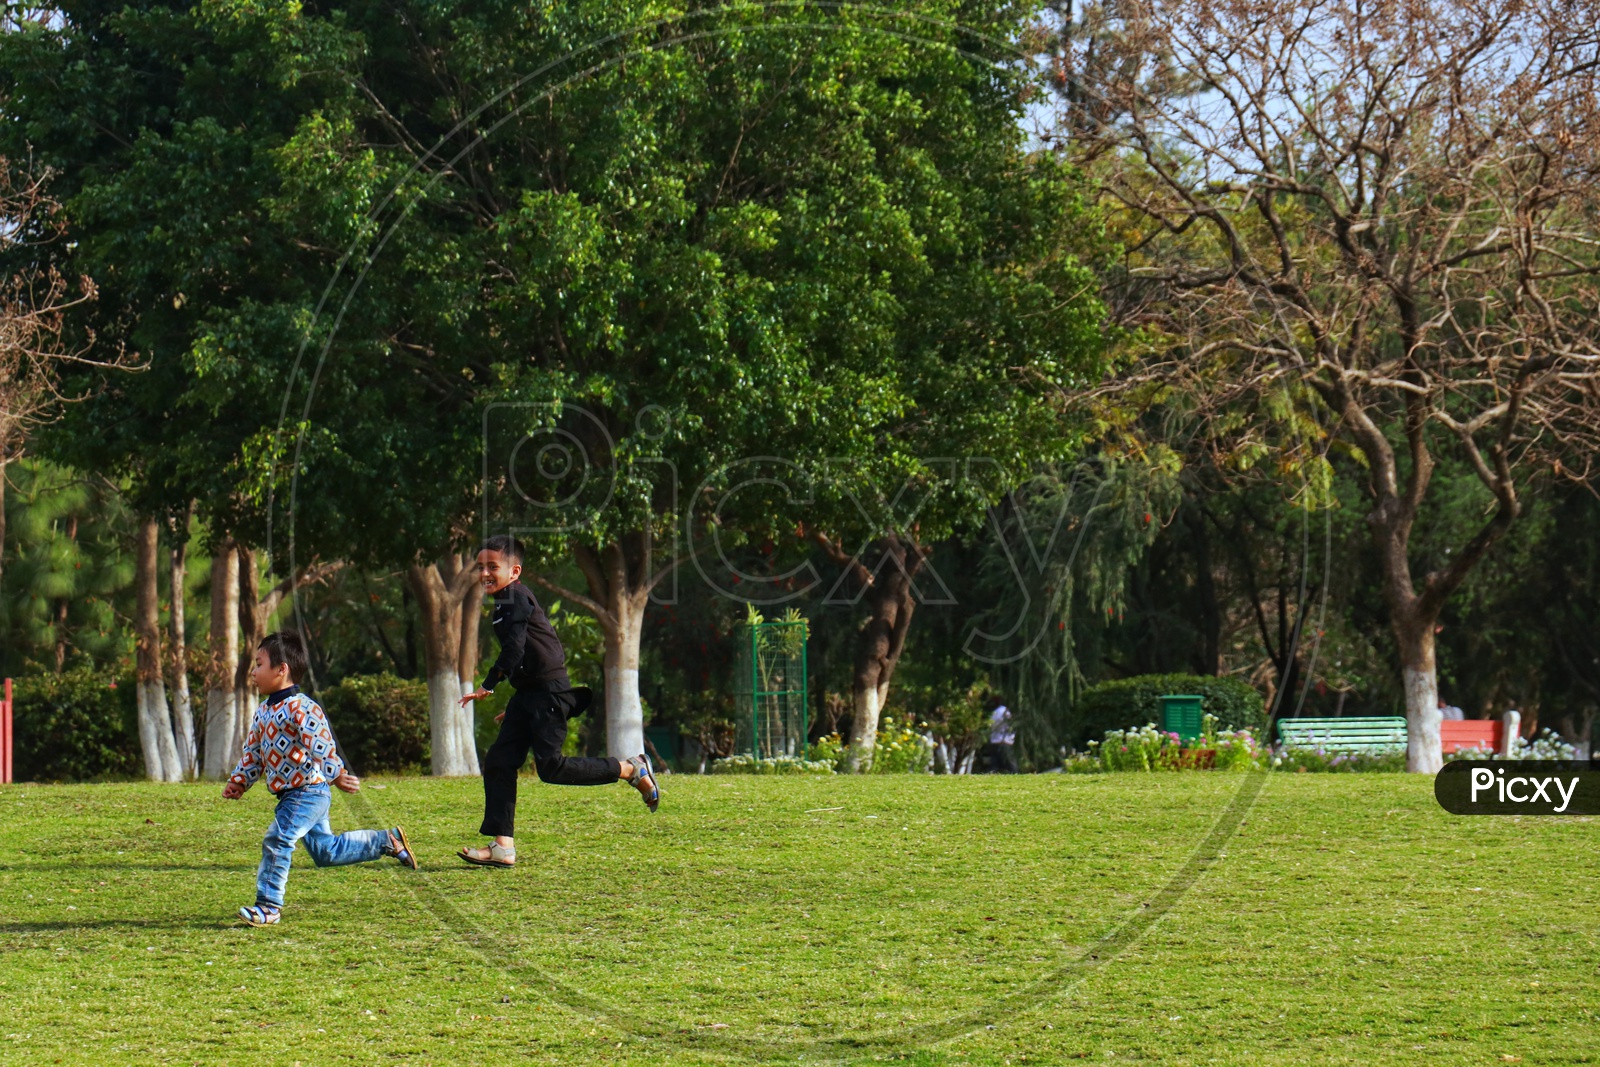 Kids playing in the park